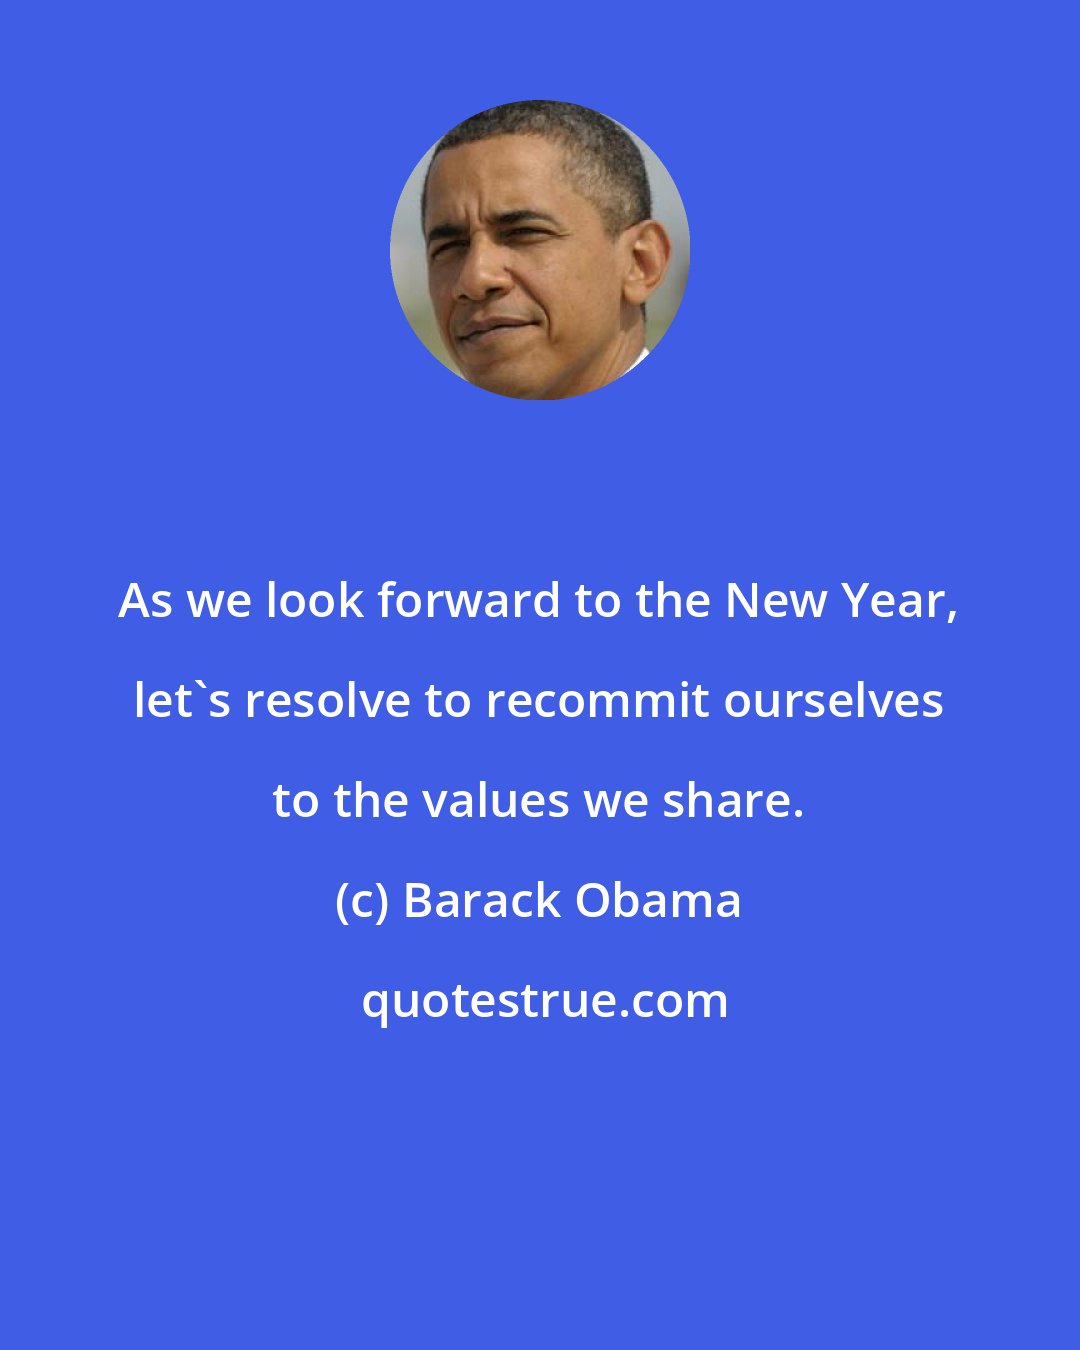 Barack Obama: As we look forward to the New Year, let's resolve to recommit ourselves to the values we share.